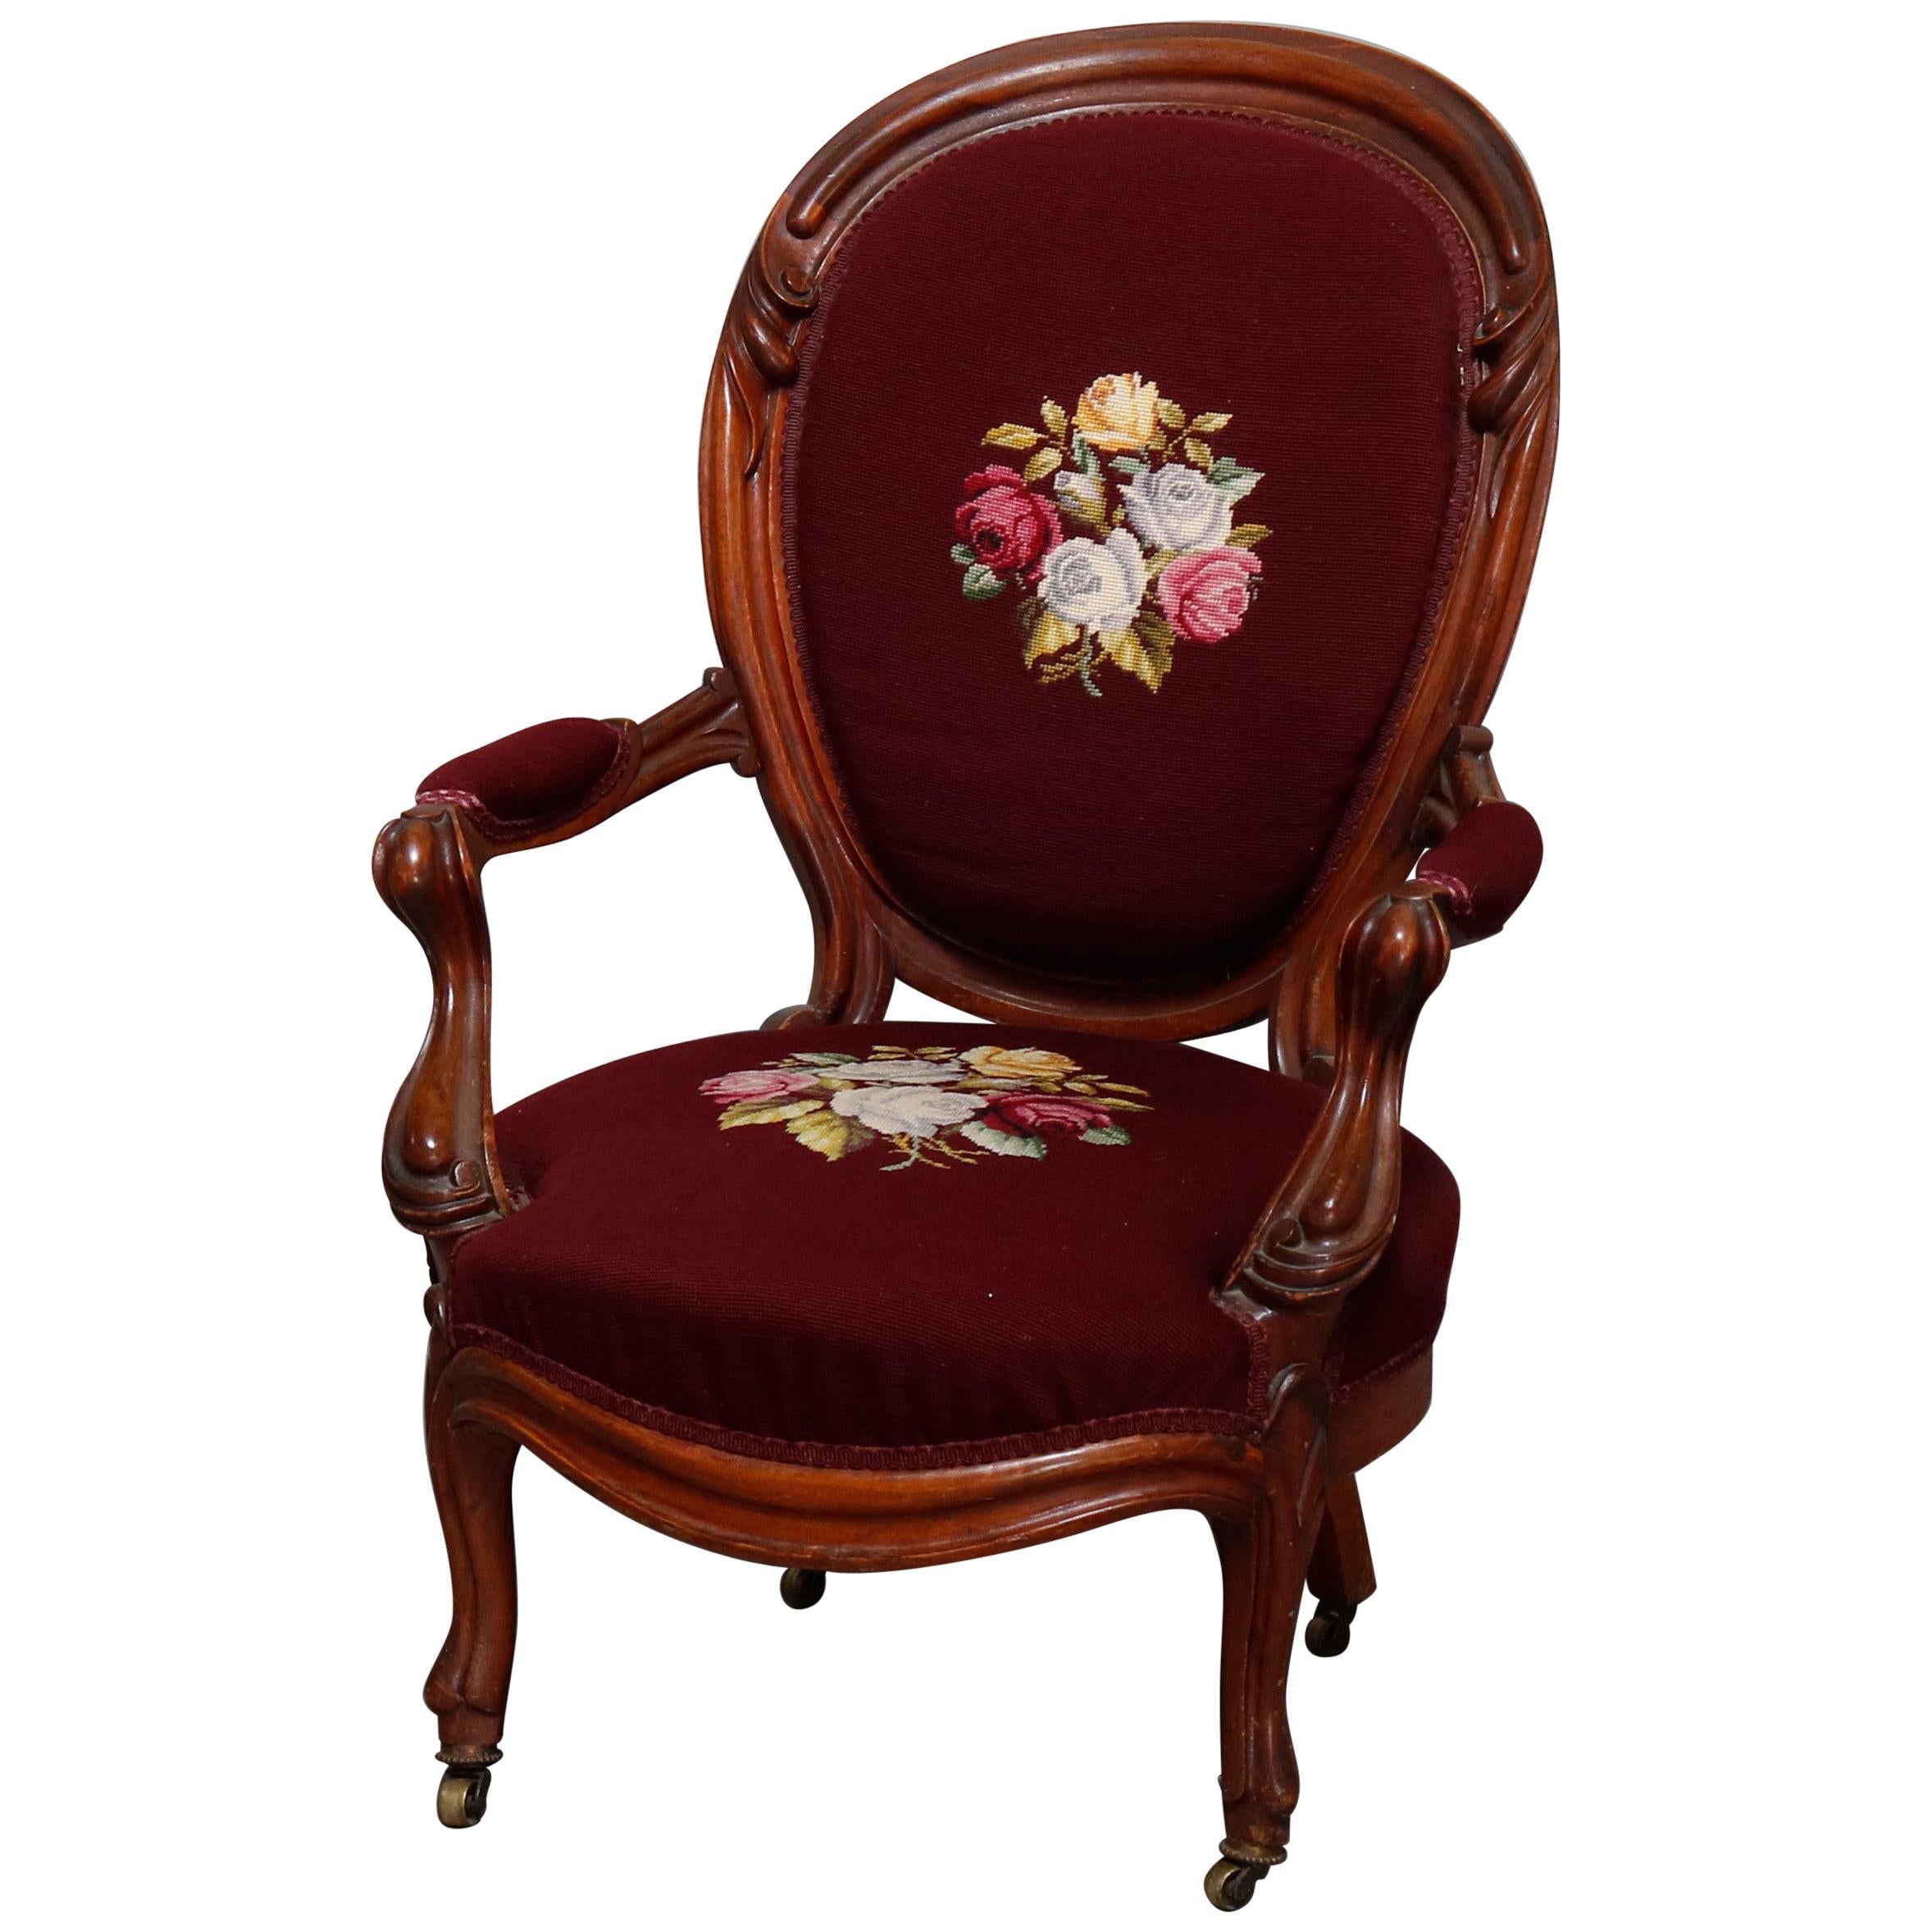 Antique Victorian Carved Walnut and Needlepoint Parlor Armchair, circa 1890